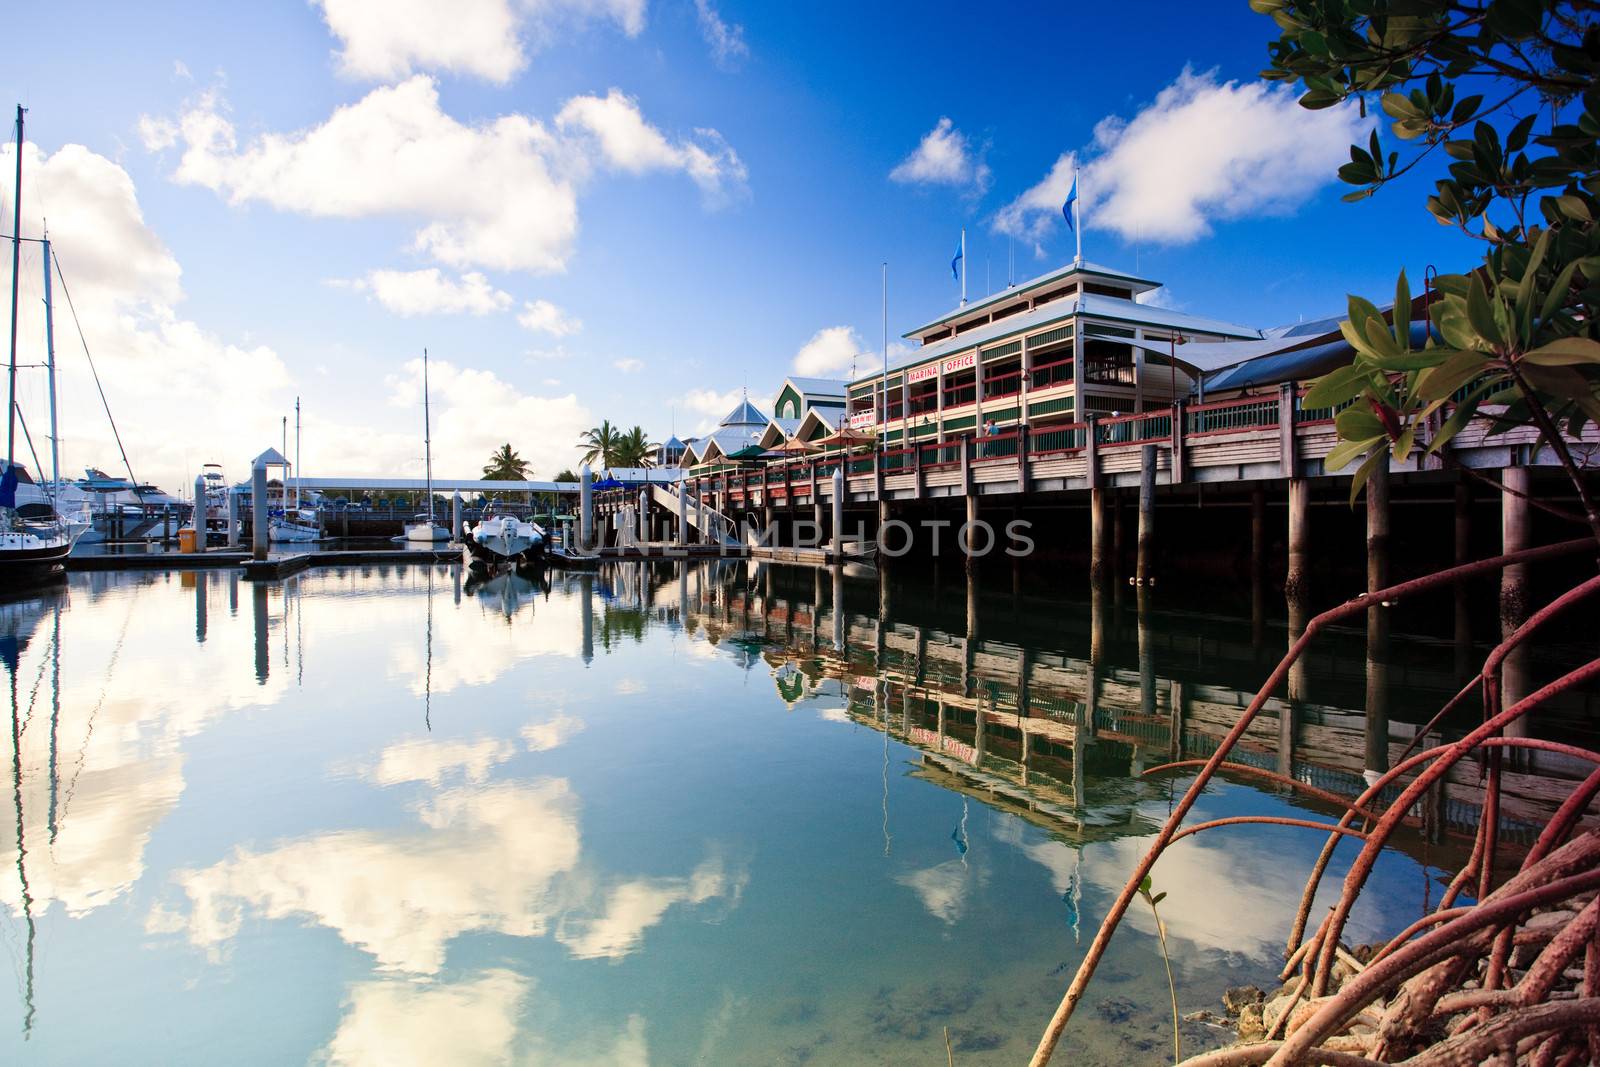 Reflection of the clouds in a calm marina by jrstock